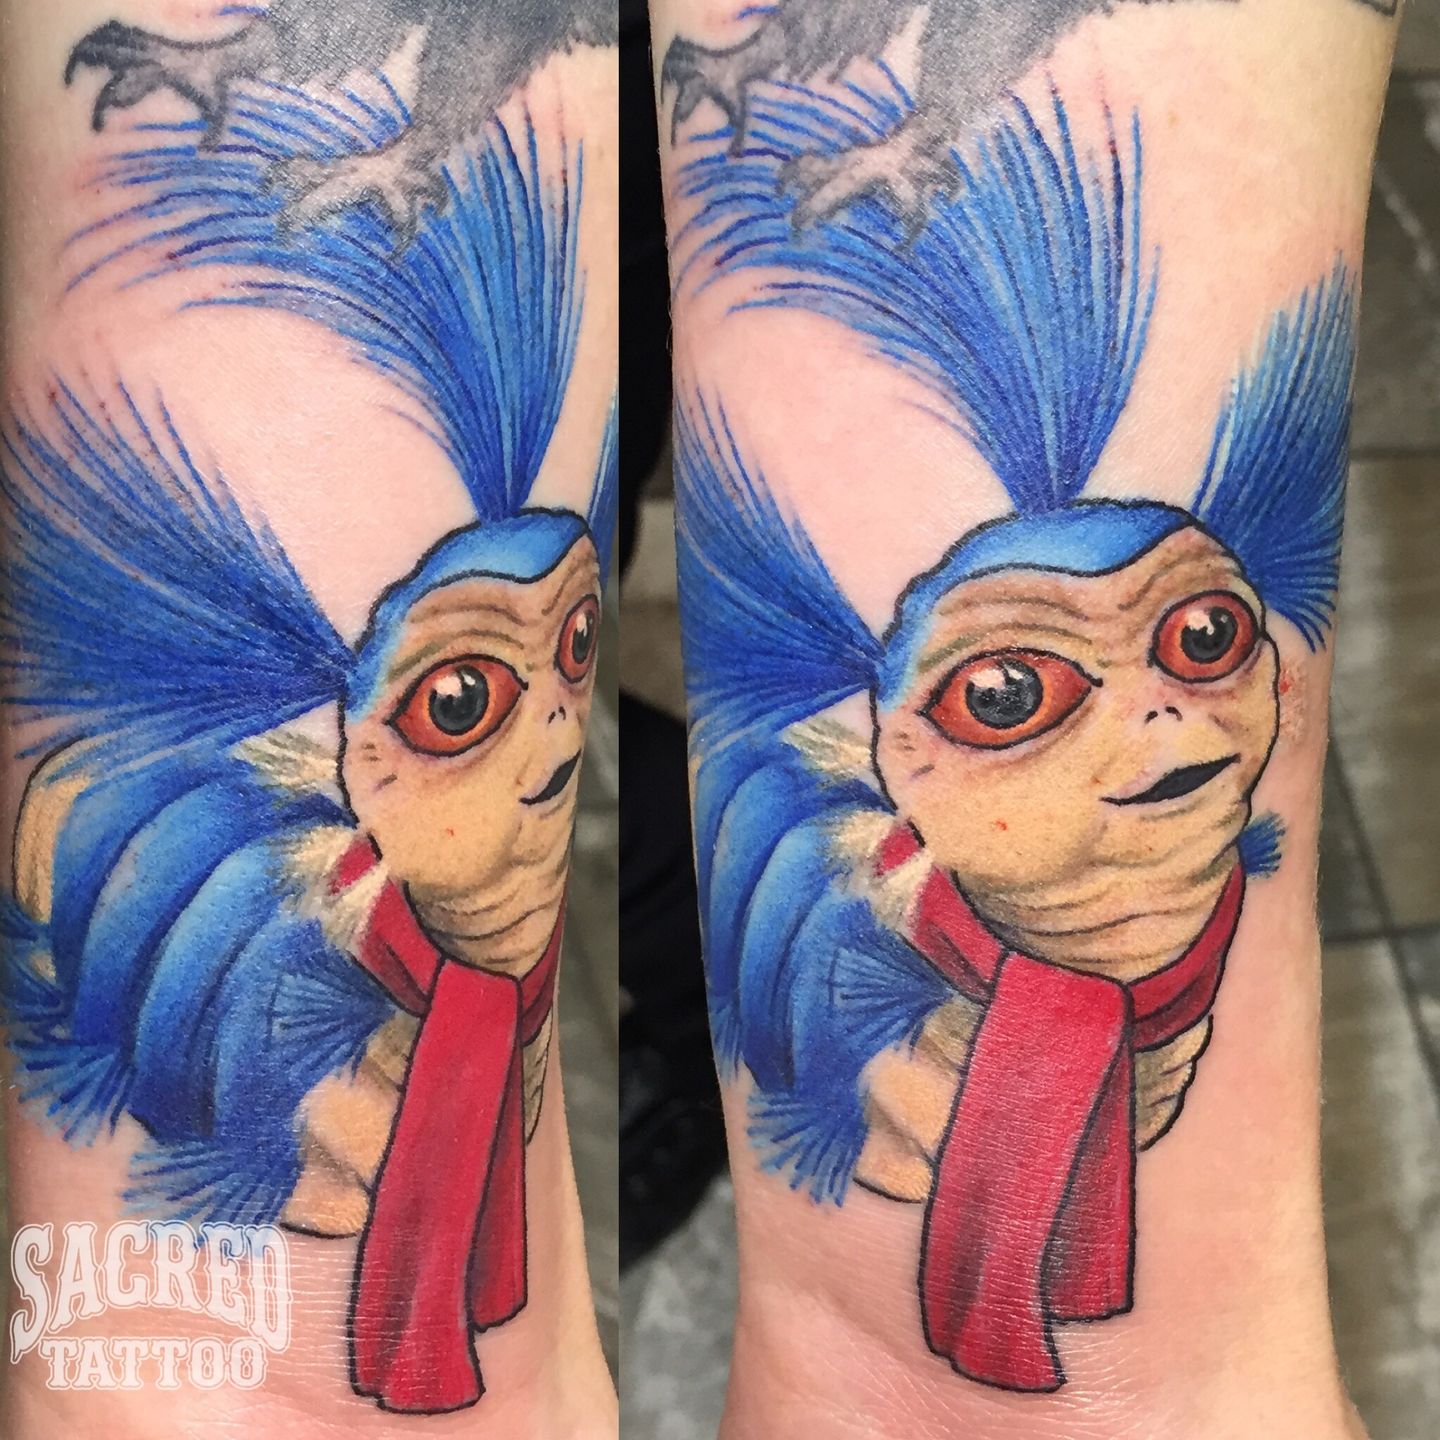 Ōtautahi Tattoo Christchurch | Check out this super cute/ Labyrinth Worm  piece // Done by @ebony_mellowship (Ebony) // In the garden city  #labyrinthwormtattoo #davidbo... | Instagram